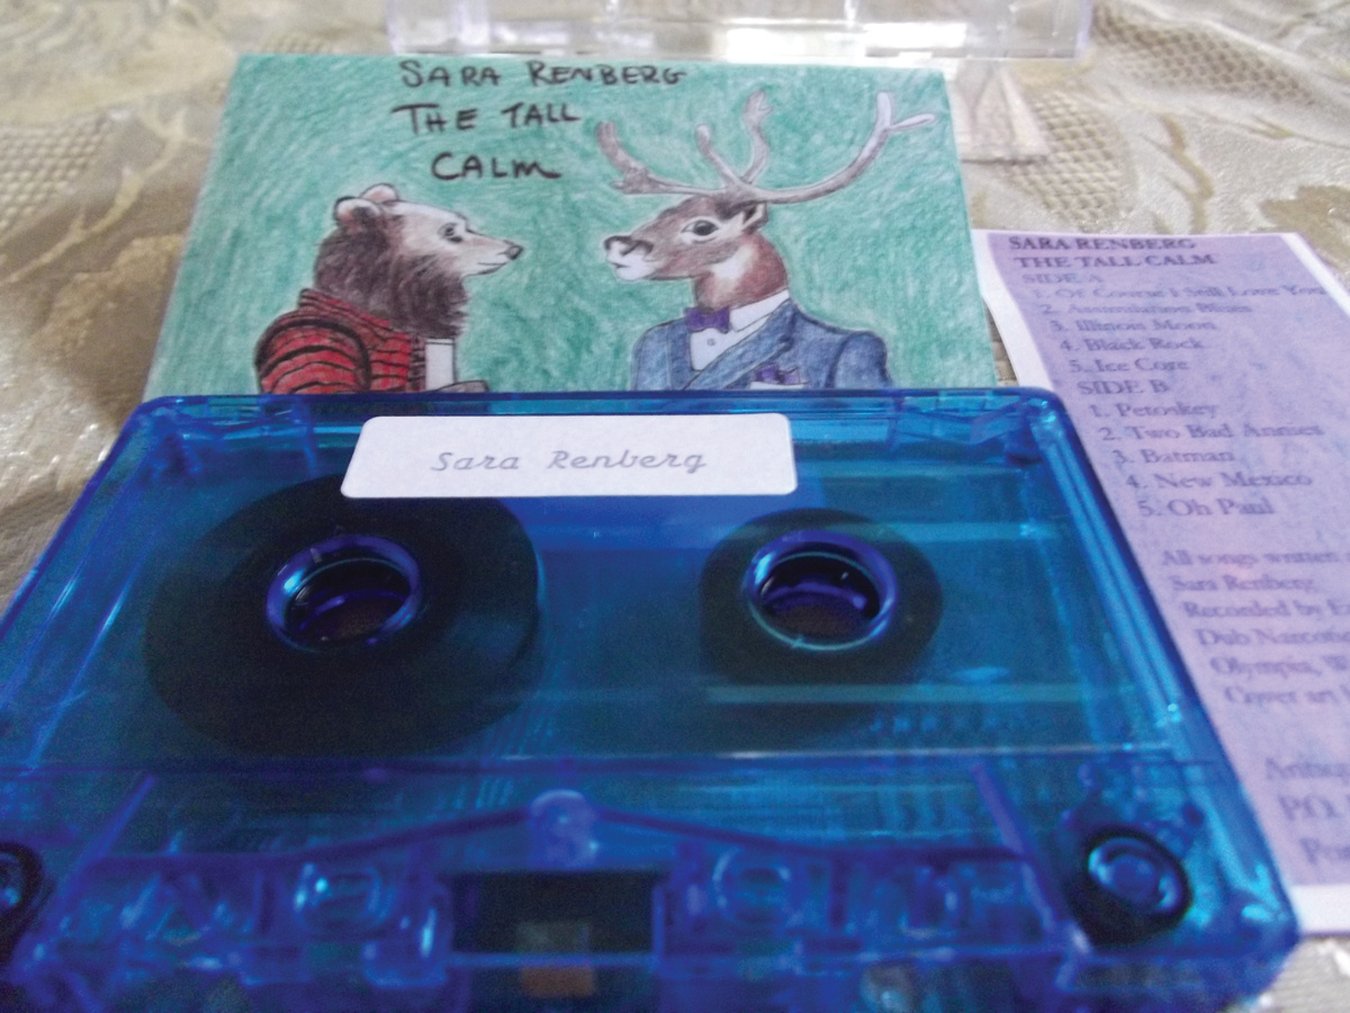 7 Reasons Your Band Should Release Music on Cassette